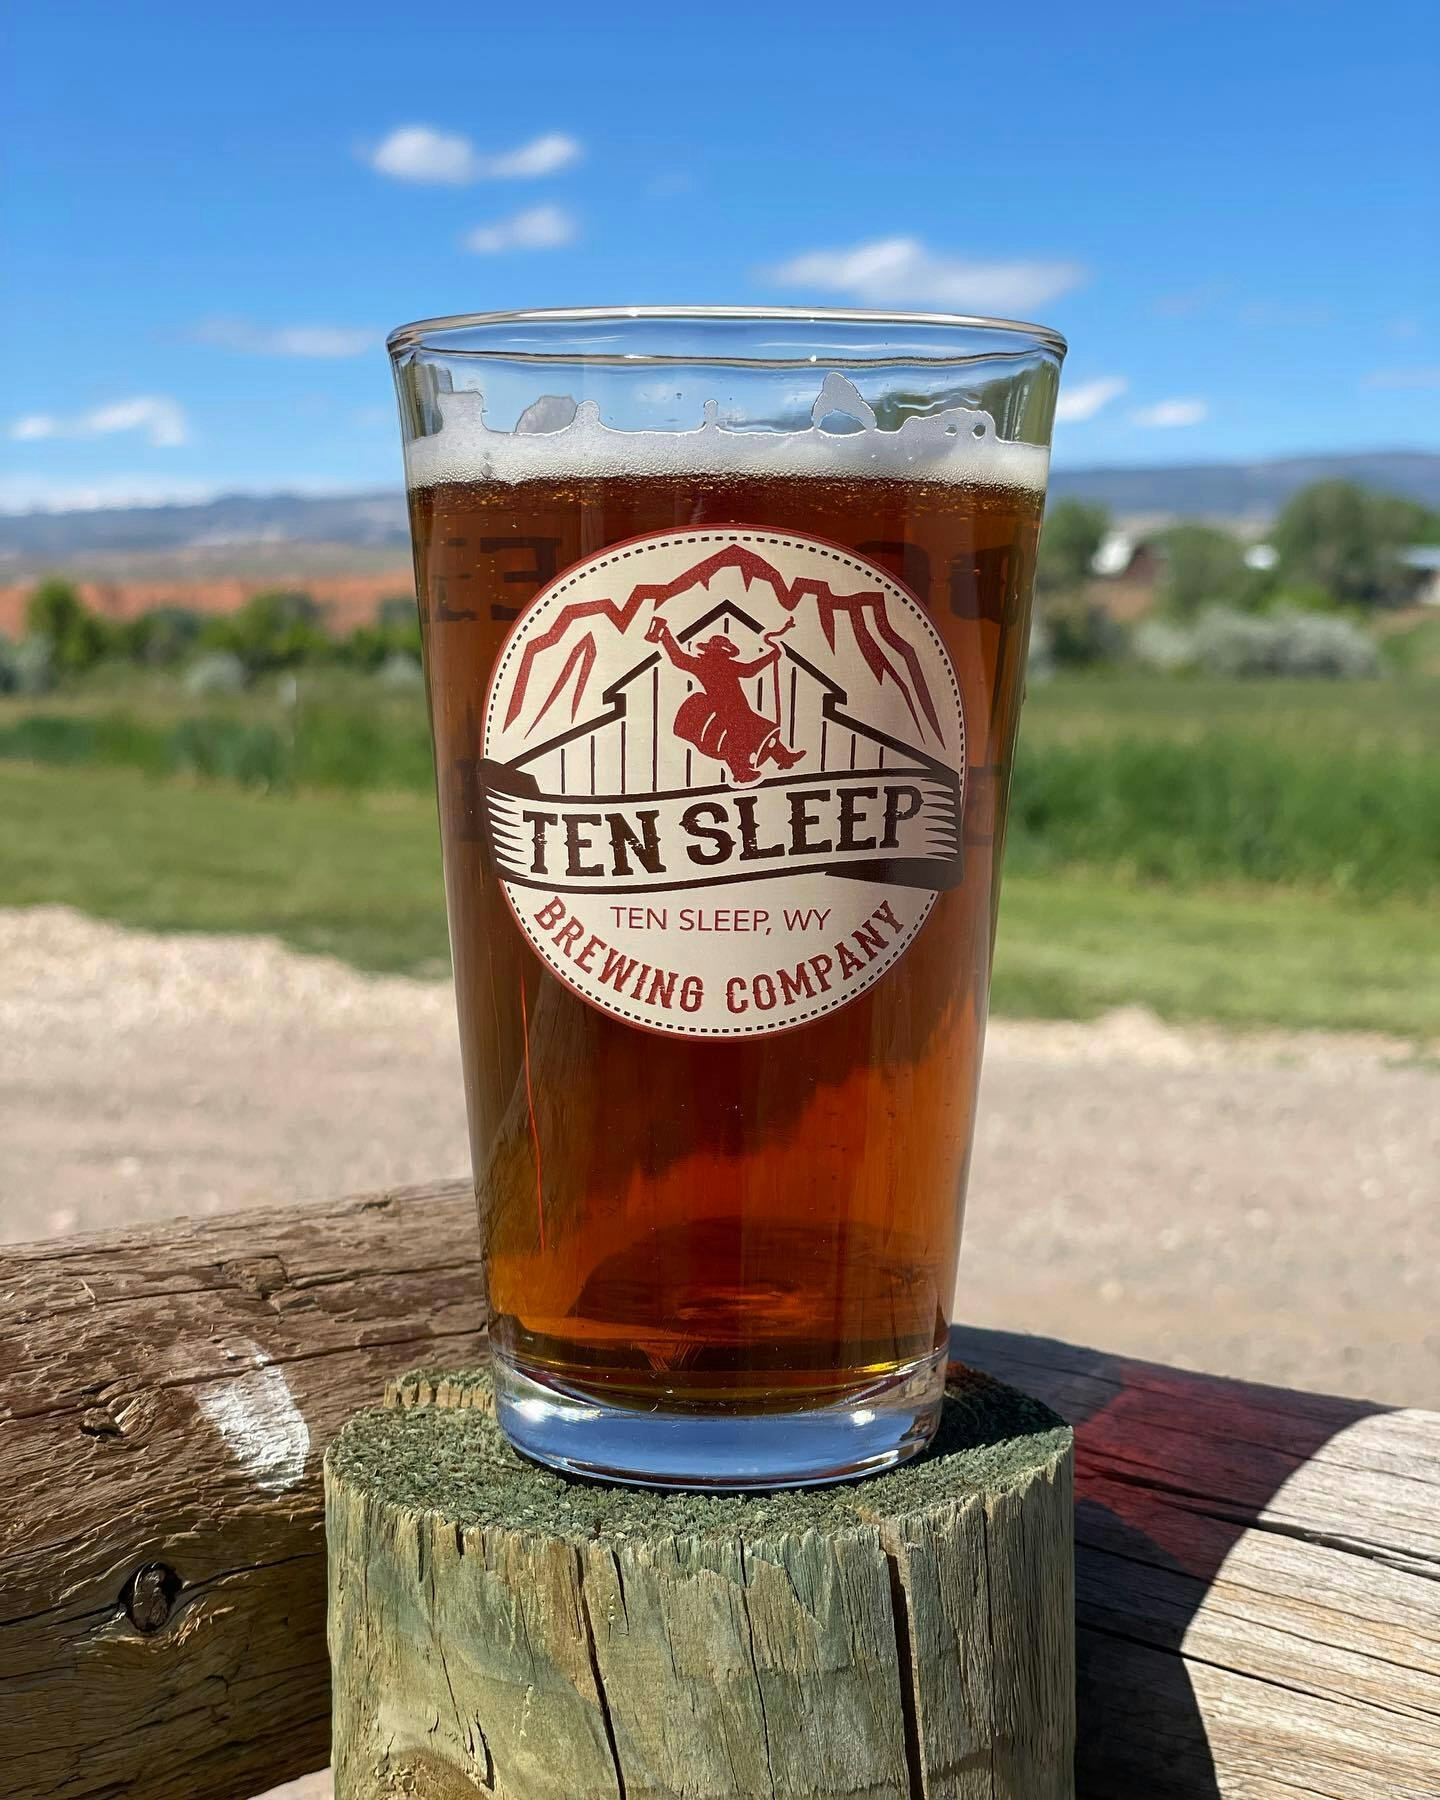 Outlaw Amber is one of the popular brews at Ten Sleep Brewing Co.